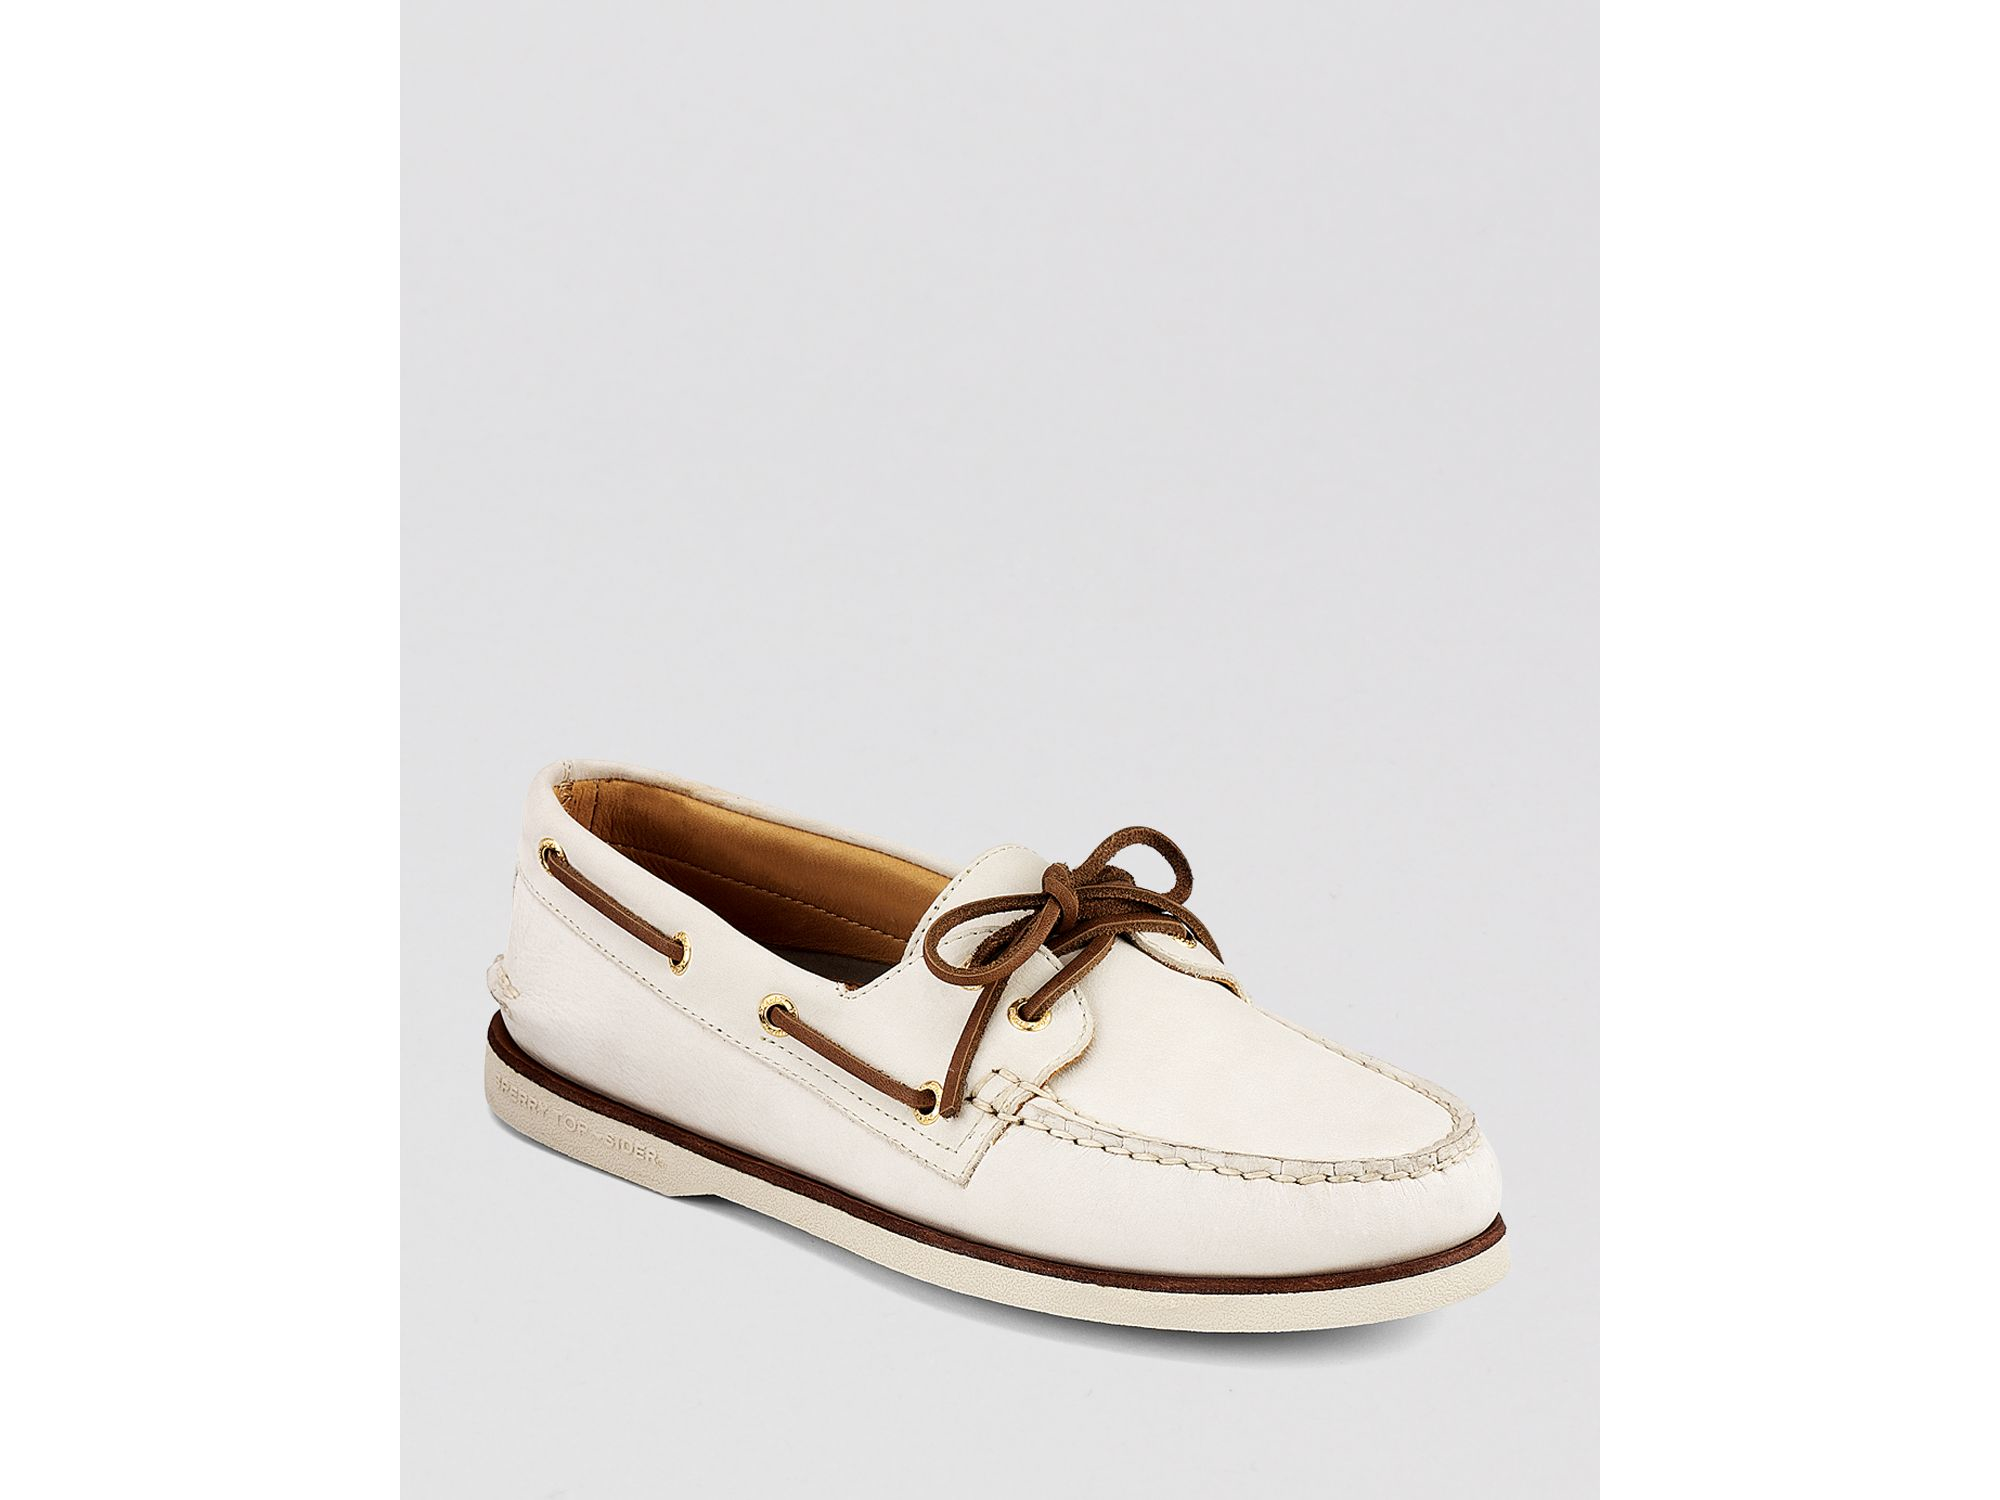 sperry top-sider gold eyelet leather boat shoes in natural